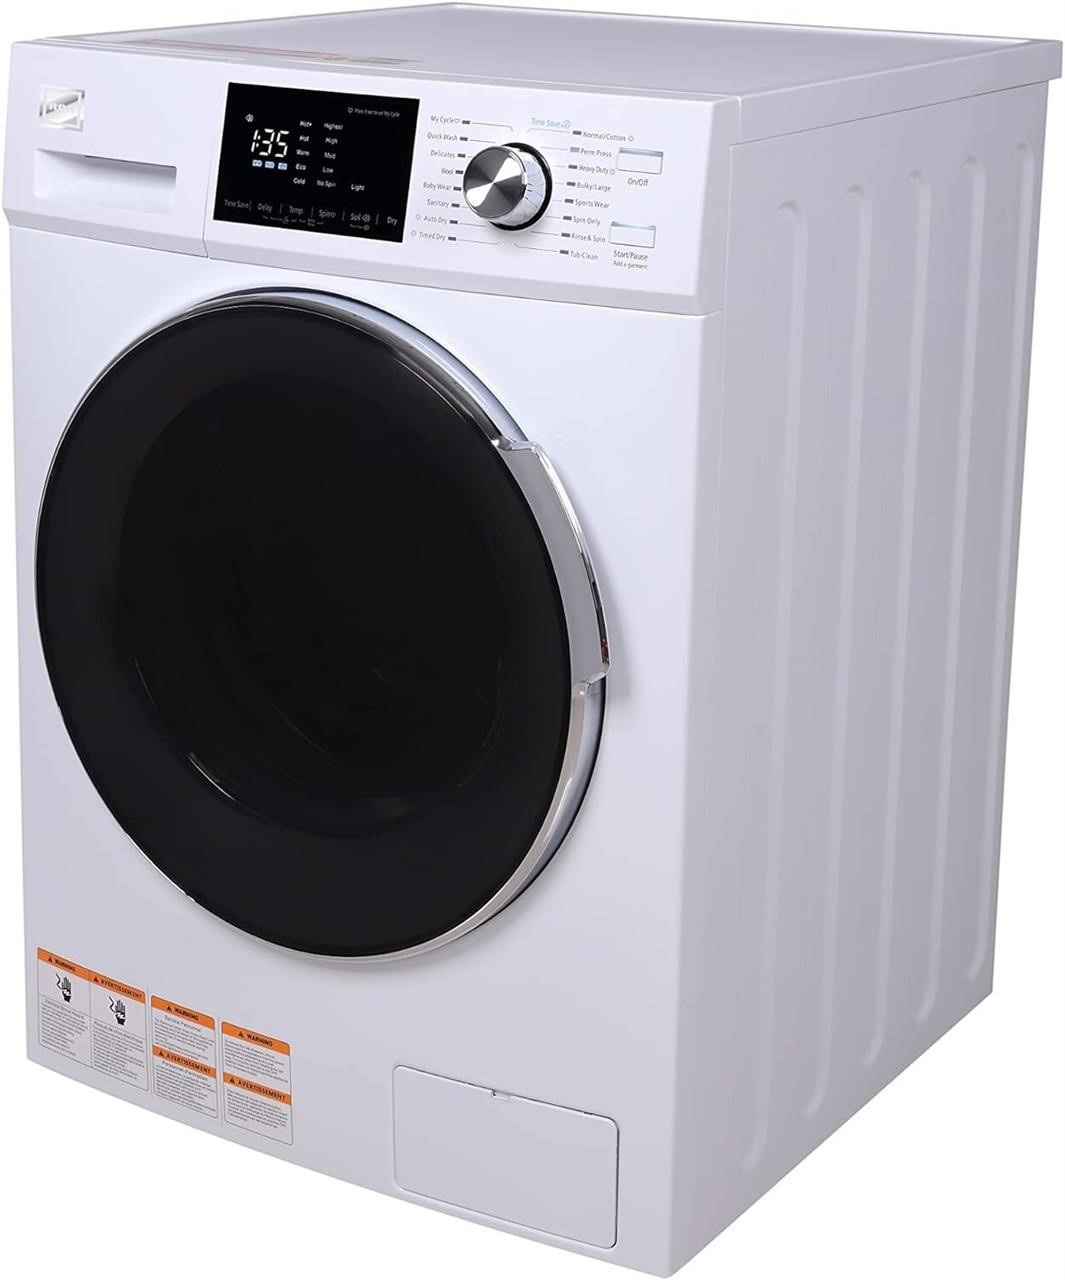 RCA RWD270 Combo Washer Dryer  2.7 cu ft  White